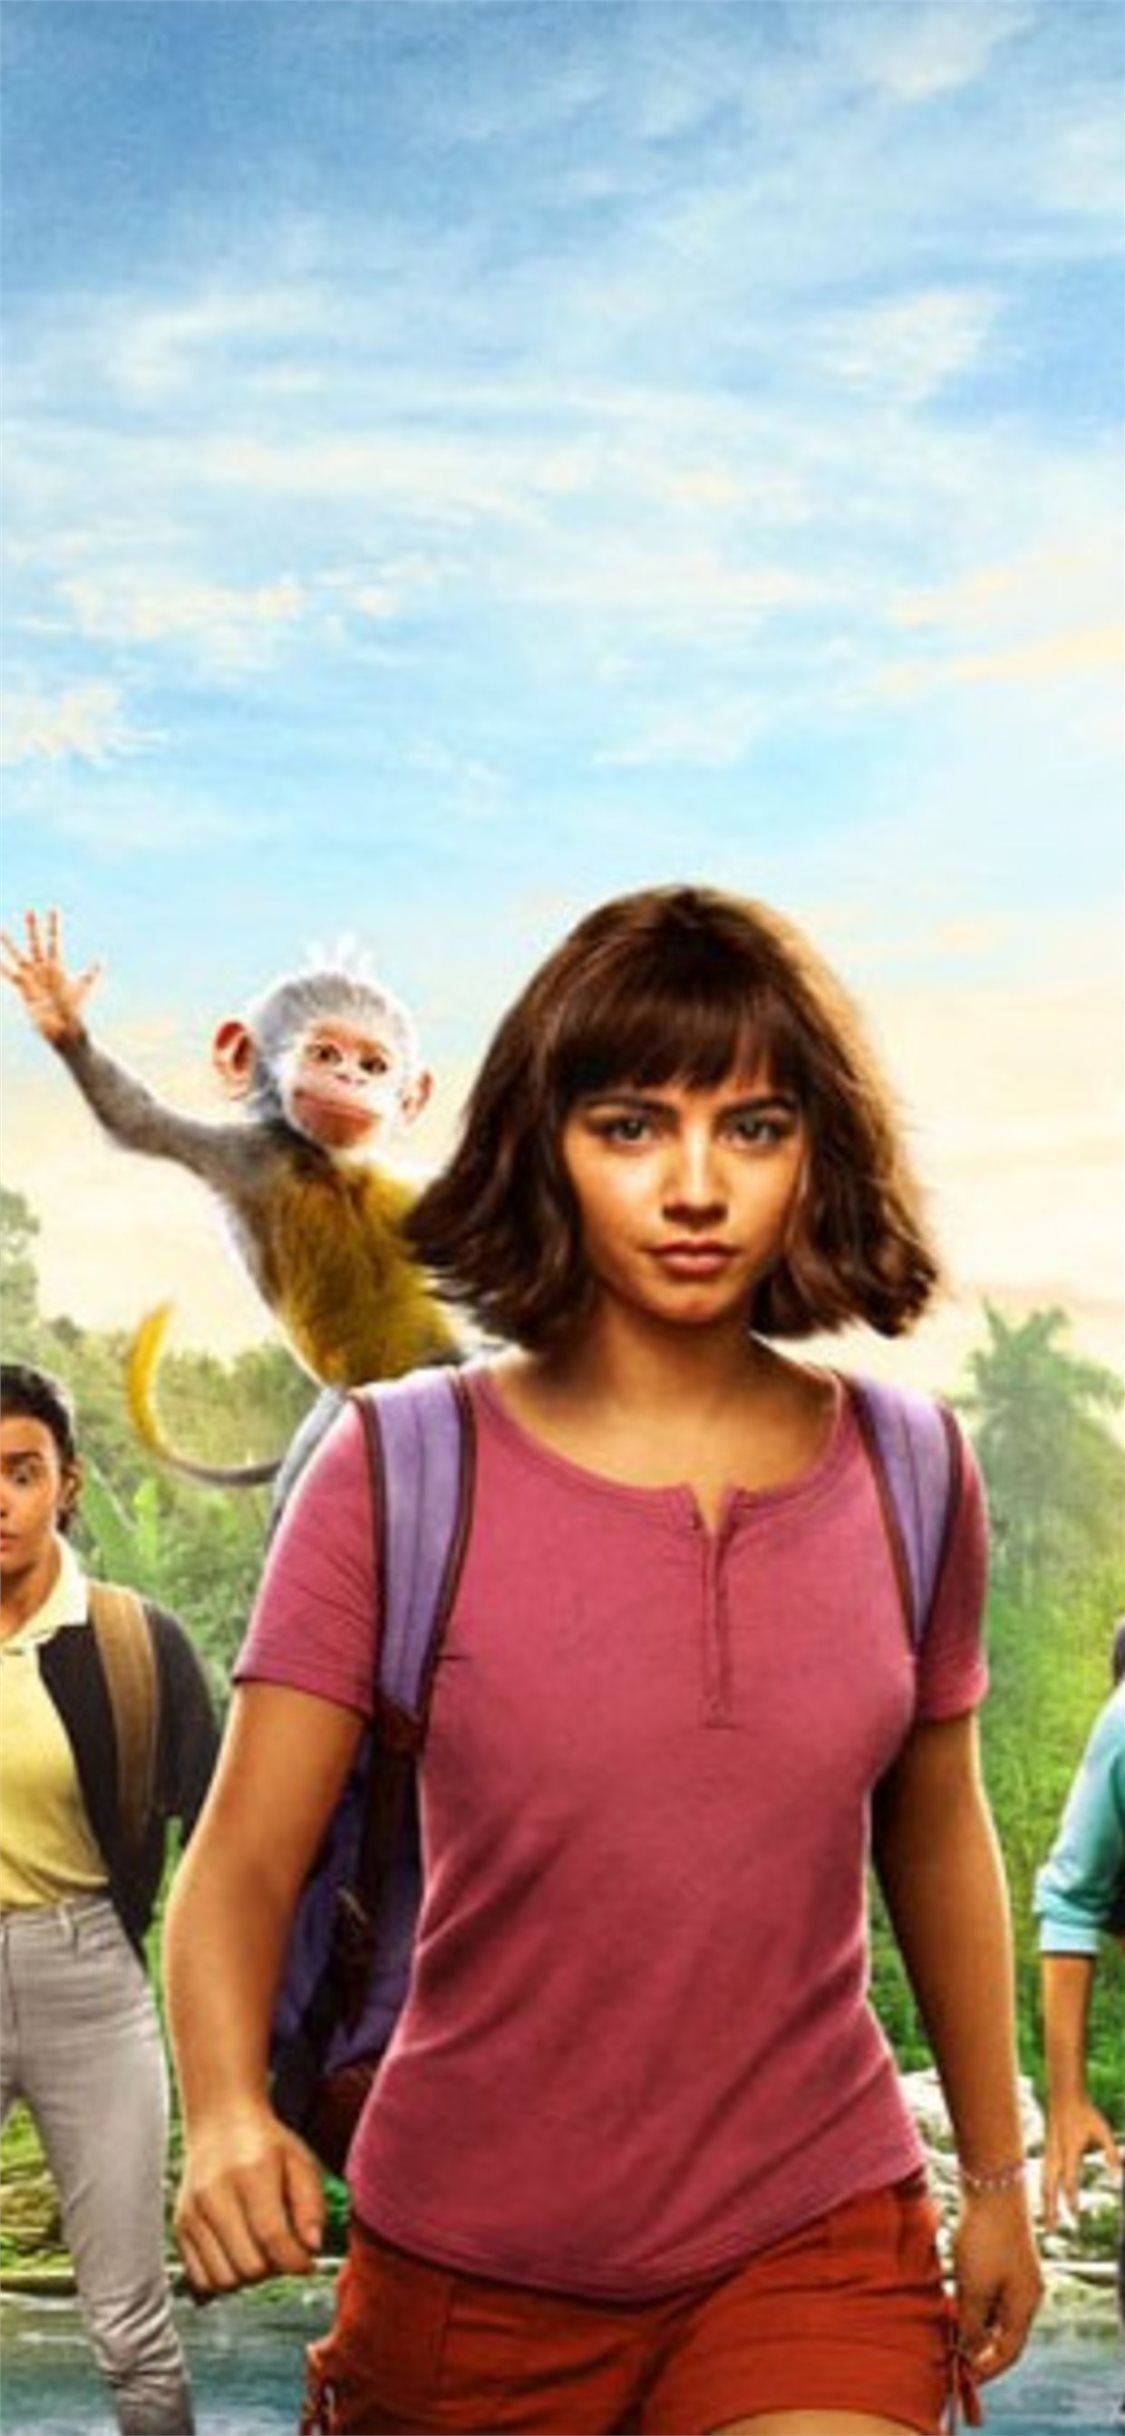 Dora Of The Lost City Of Gold - HD Wallpaper 